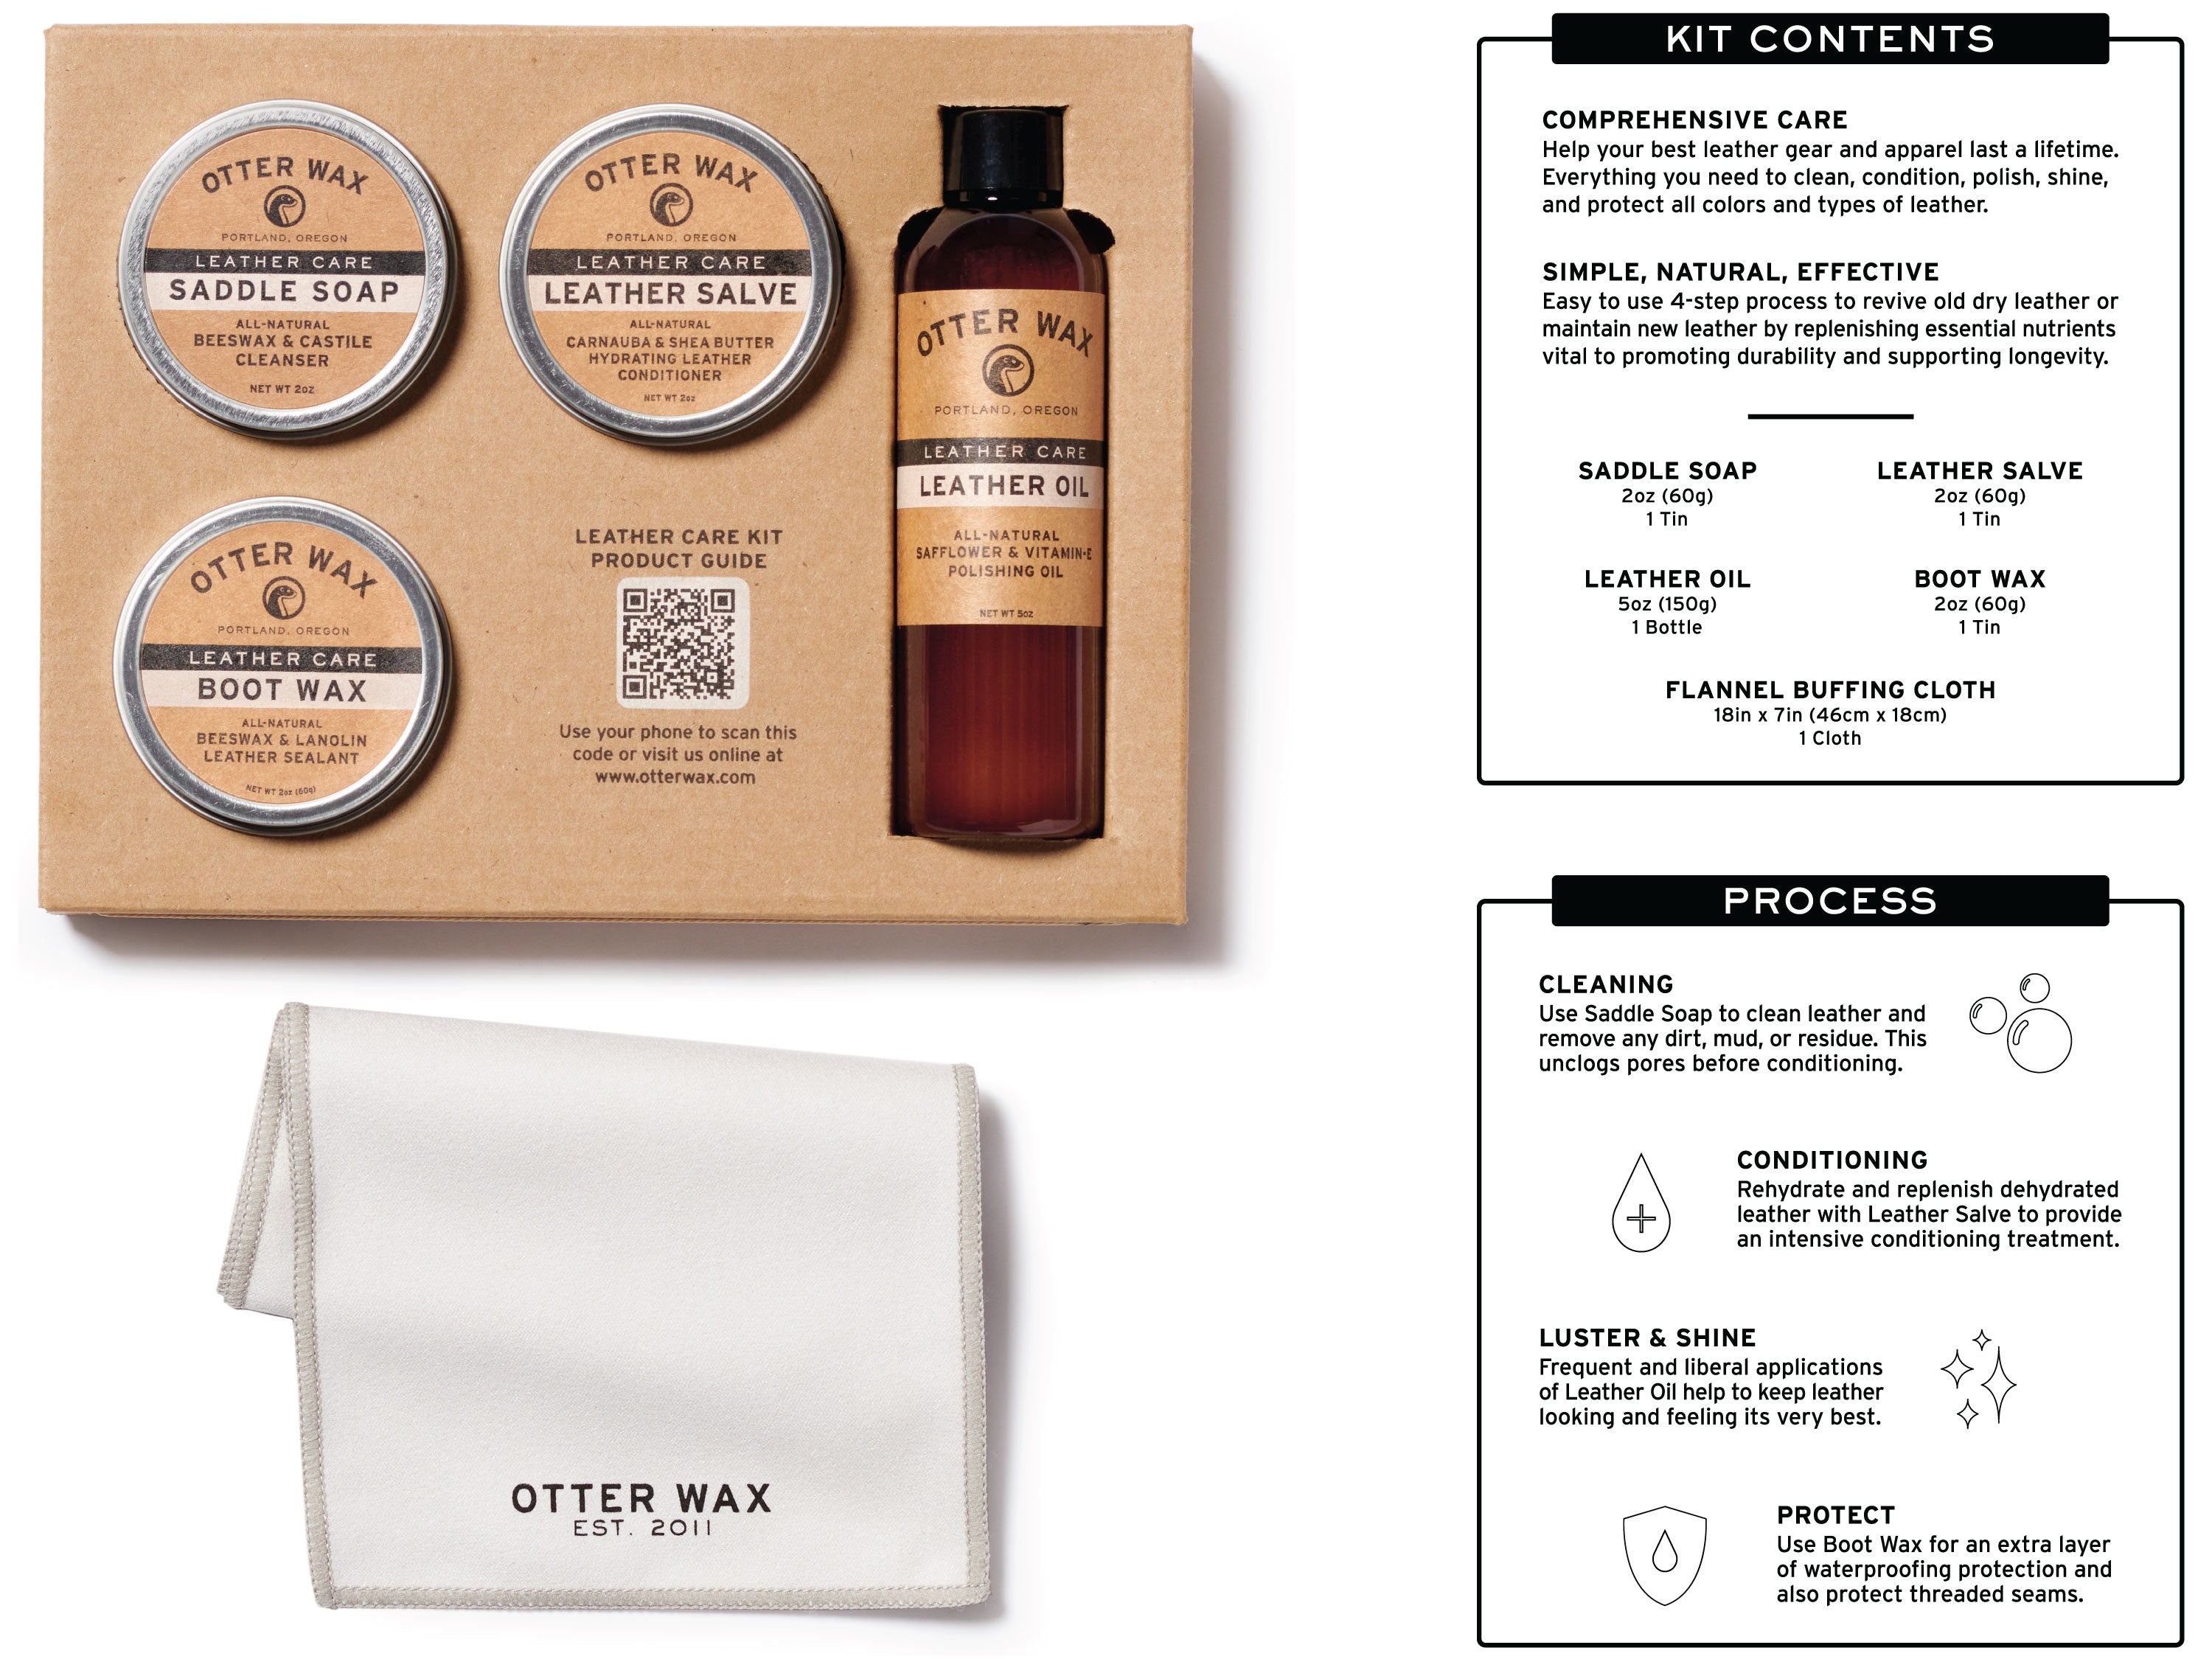 Otter Wax Leather Care Kit Instructions